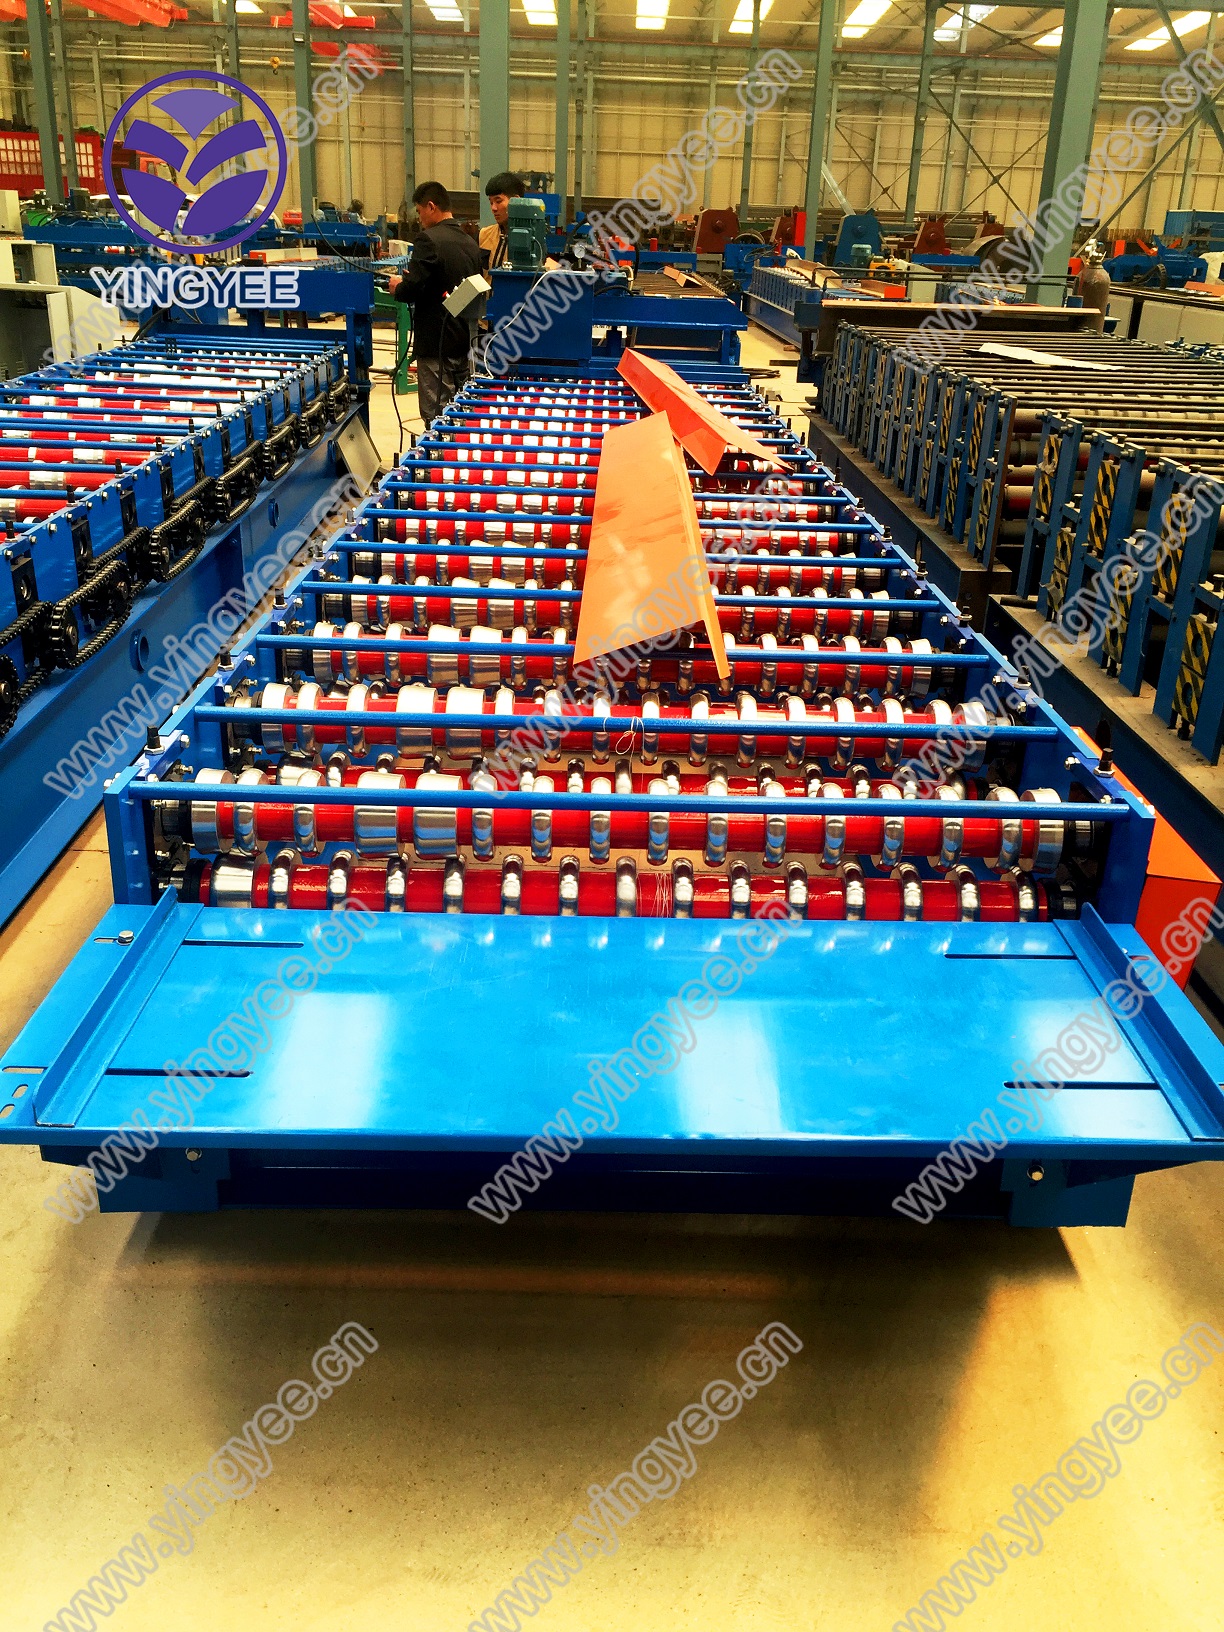 Corrugated roof sheet roll forming machine01